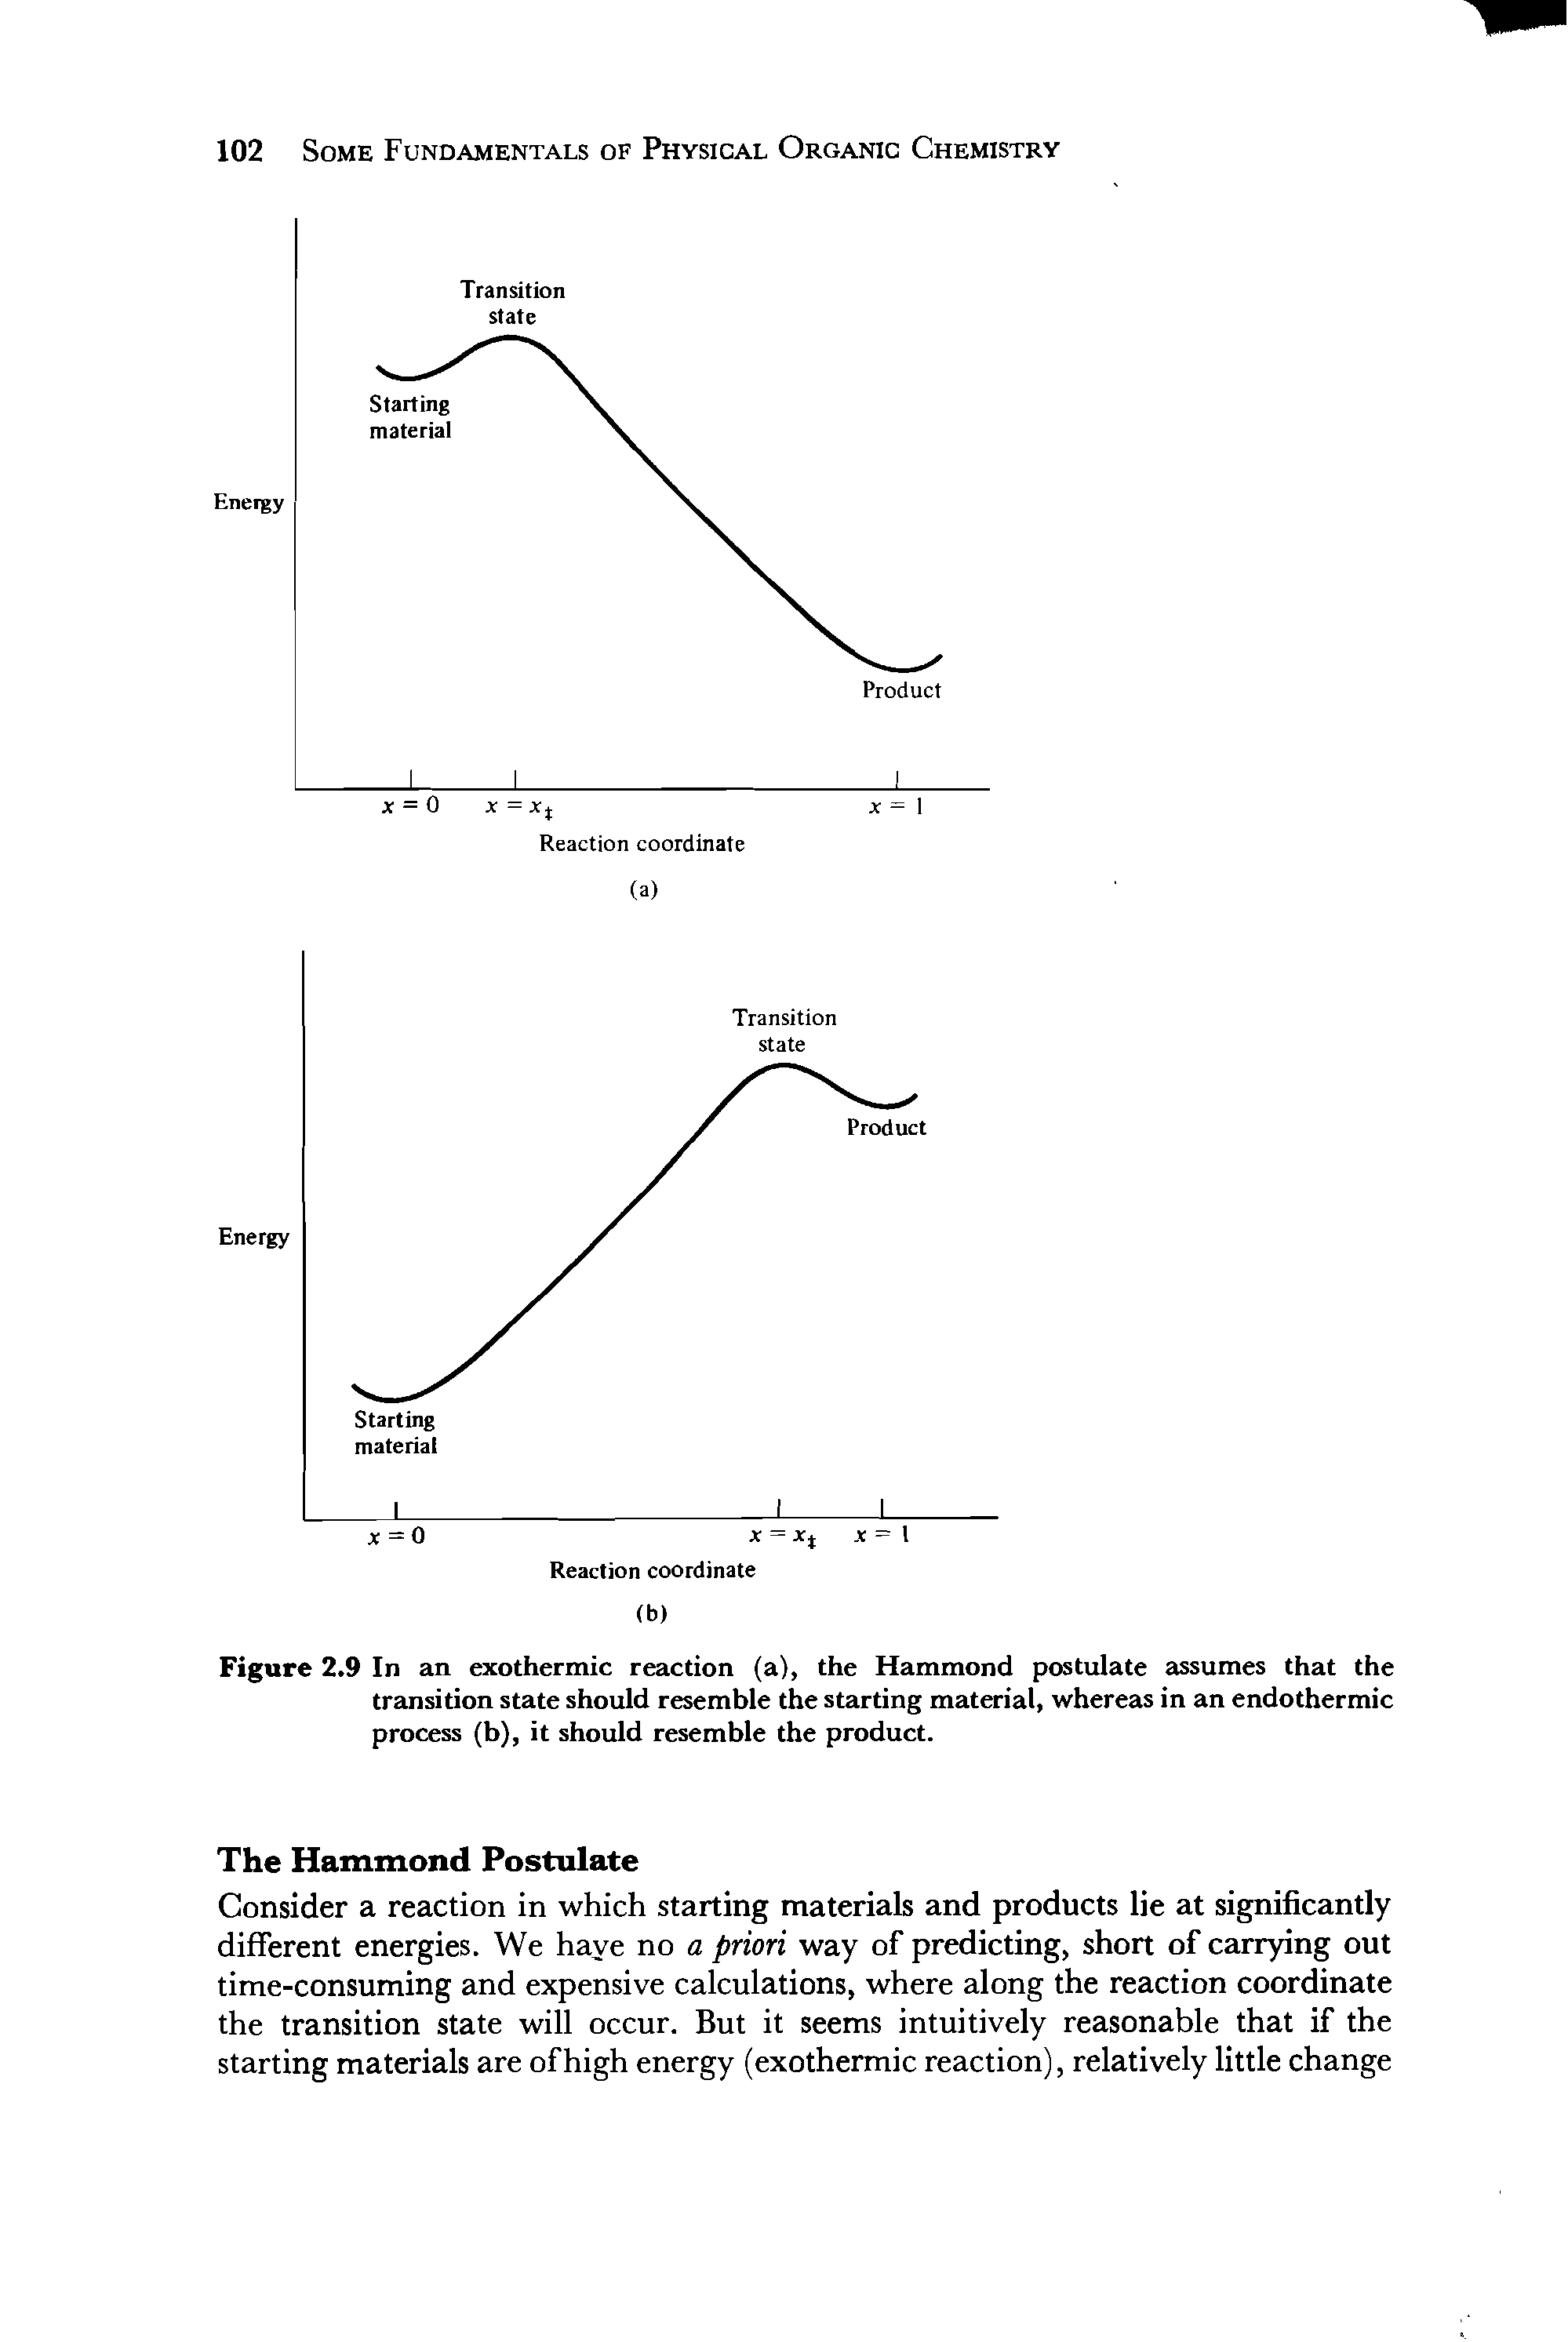 Figure 2.9 In an exothermic reaction (a), the Hammond postulate assumes that the transition state should resemble the starting material, whereas in an endothermic process (b), it should resemble the product.